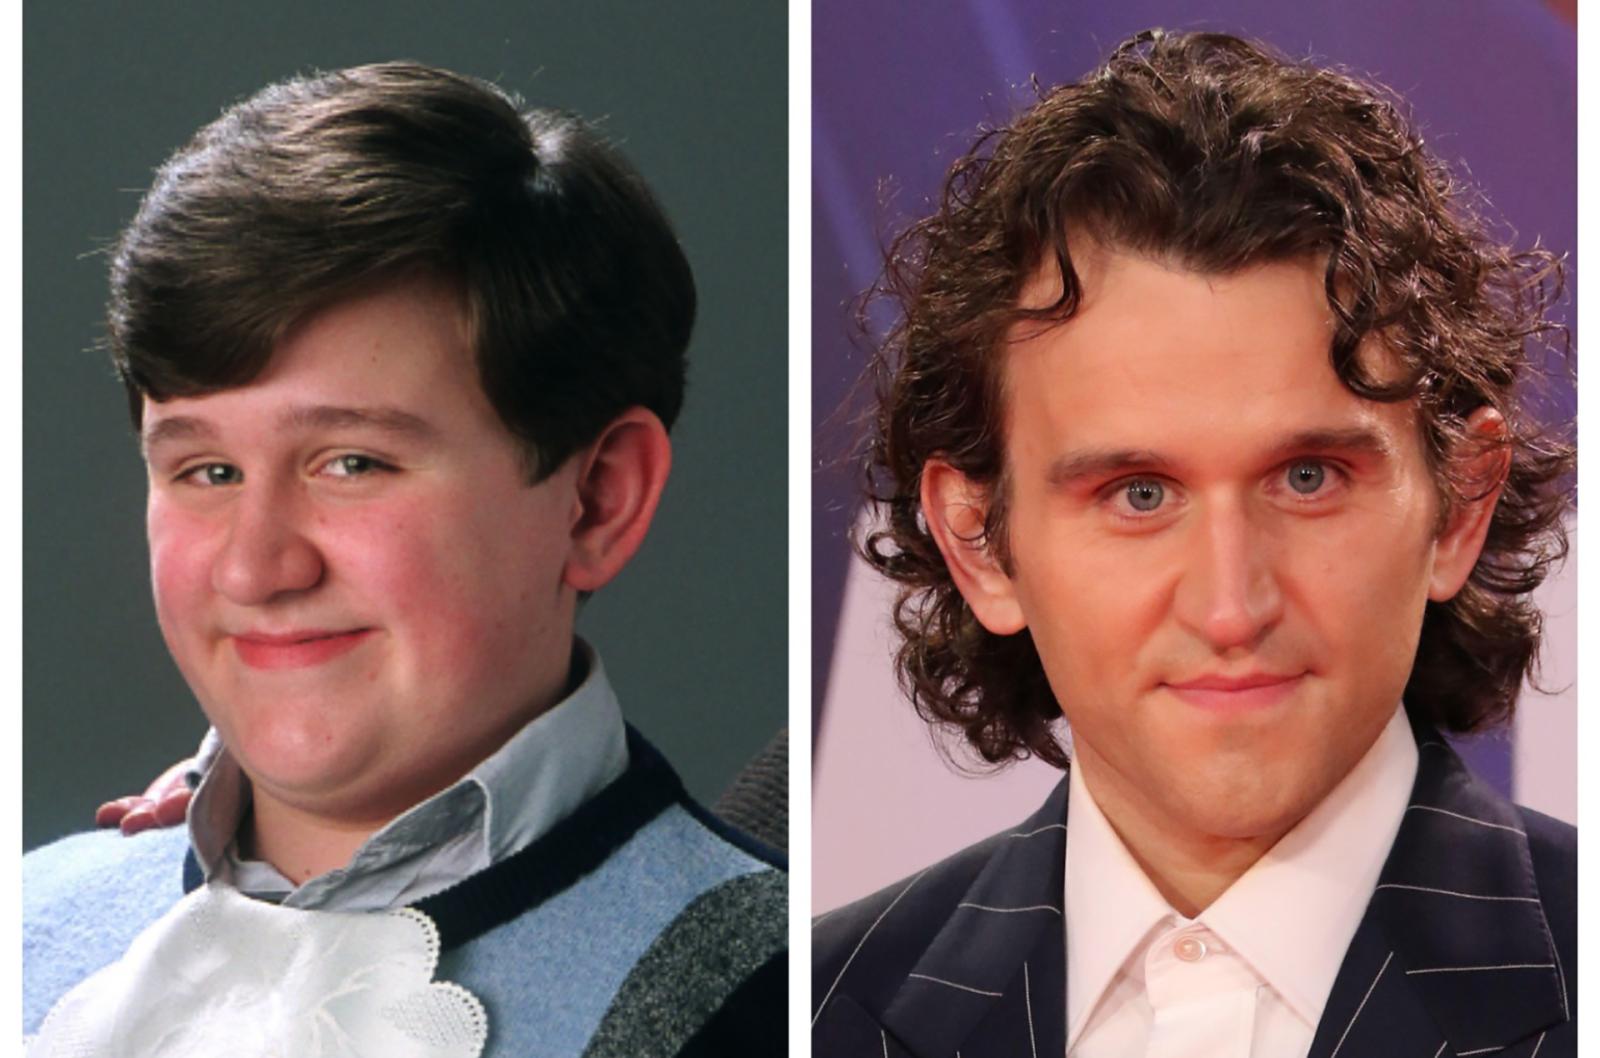 20 Years On: Here's What The Cast of Harry Potter Look Like Now - image 4